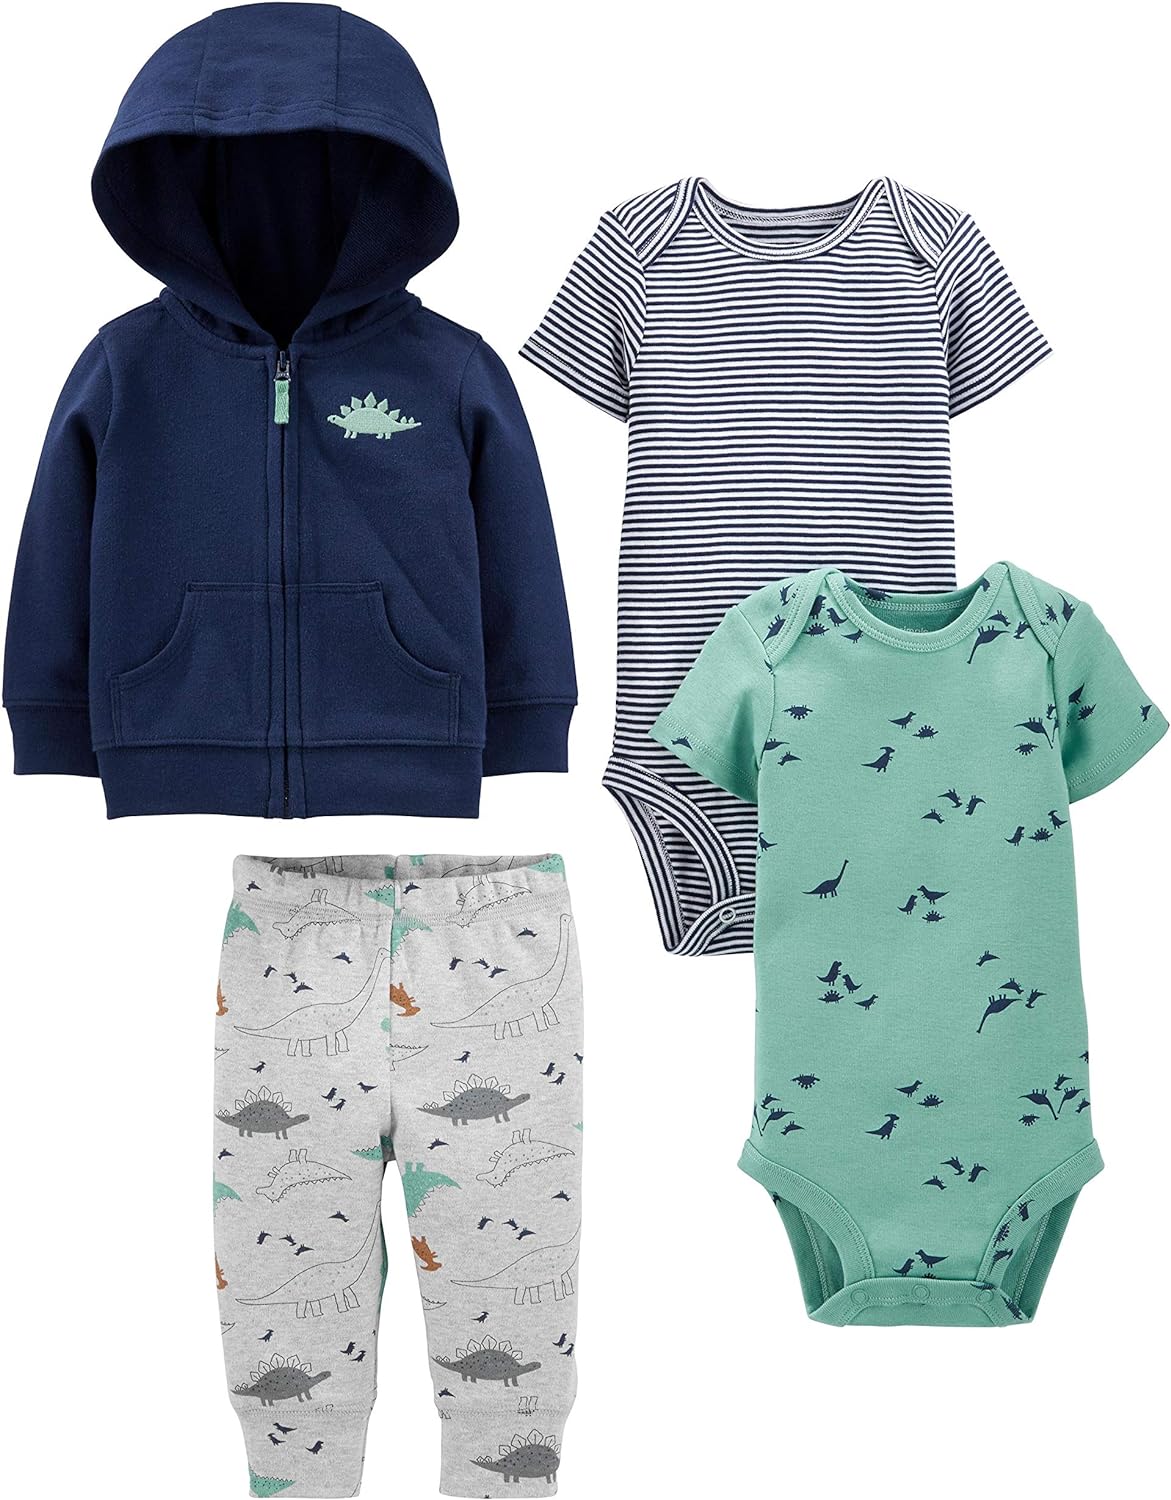 Carter's Baby Jacket, Pant, and Bodysuit Set